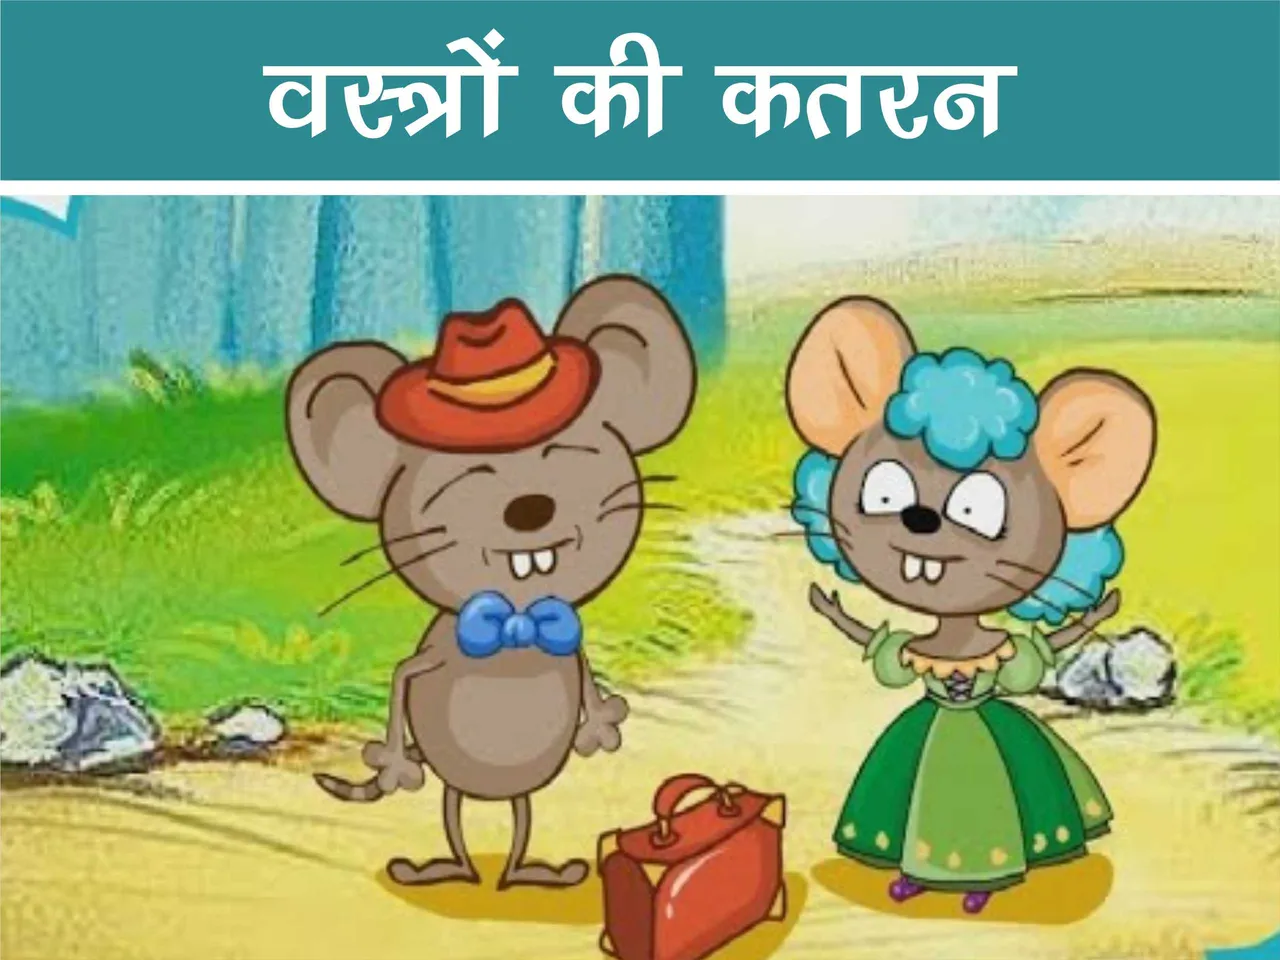 Mouse with his wife cartoon image